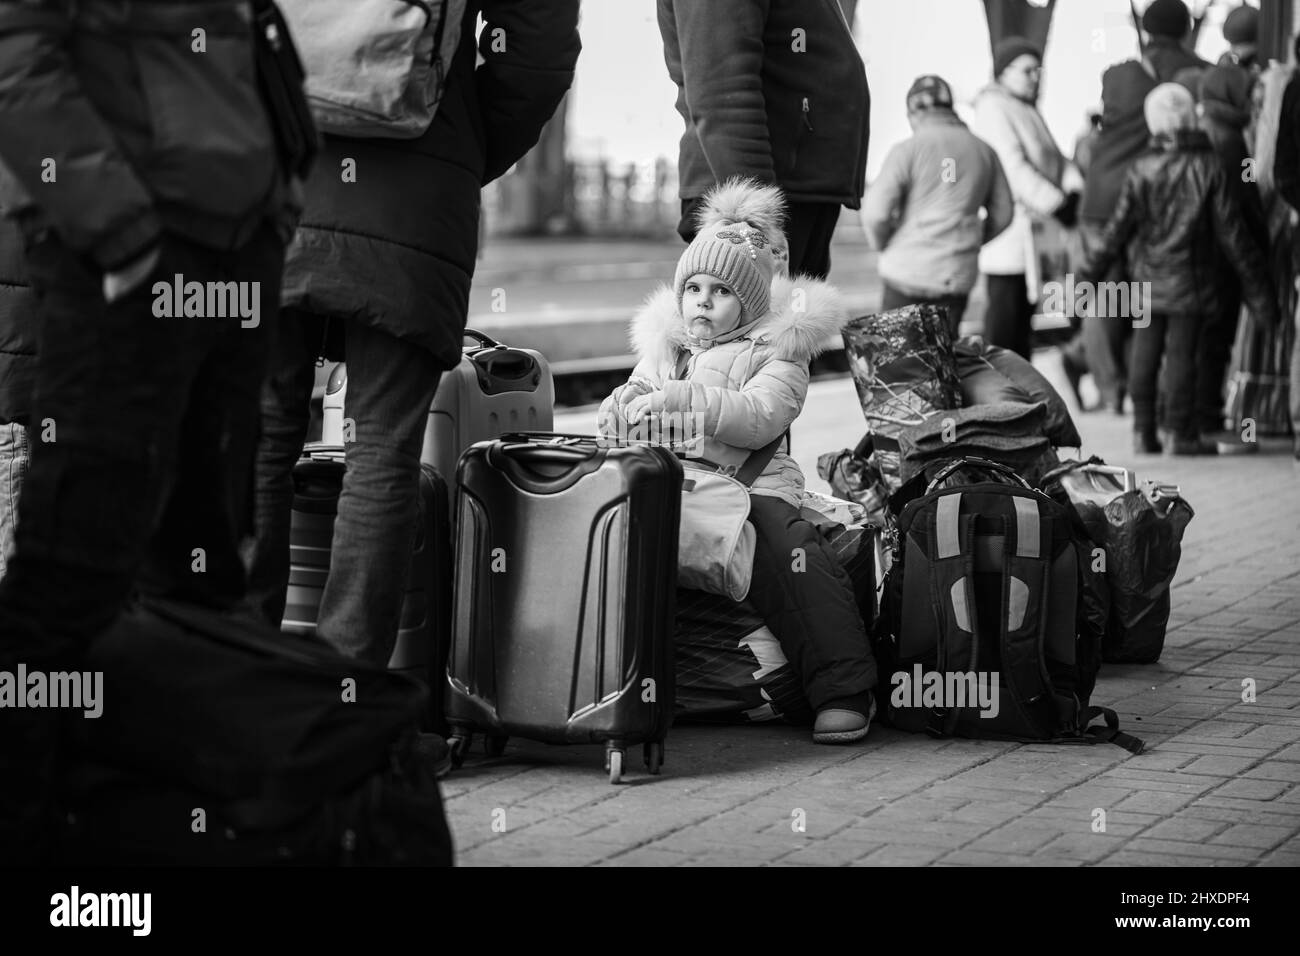 Lviv, Ukraine - March 11, 2022: Ukrainian refugees on Lviv railway station waiting for train to escape to Europe during russian war Stock Photo